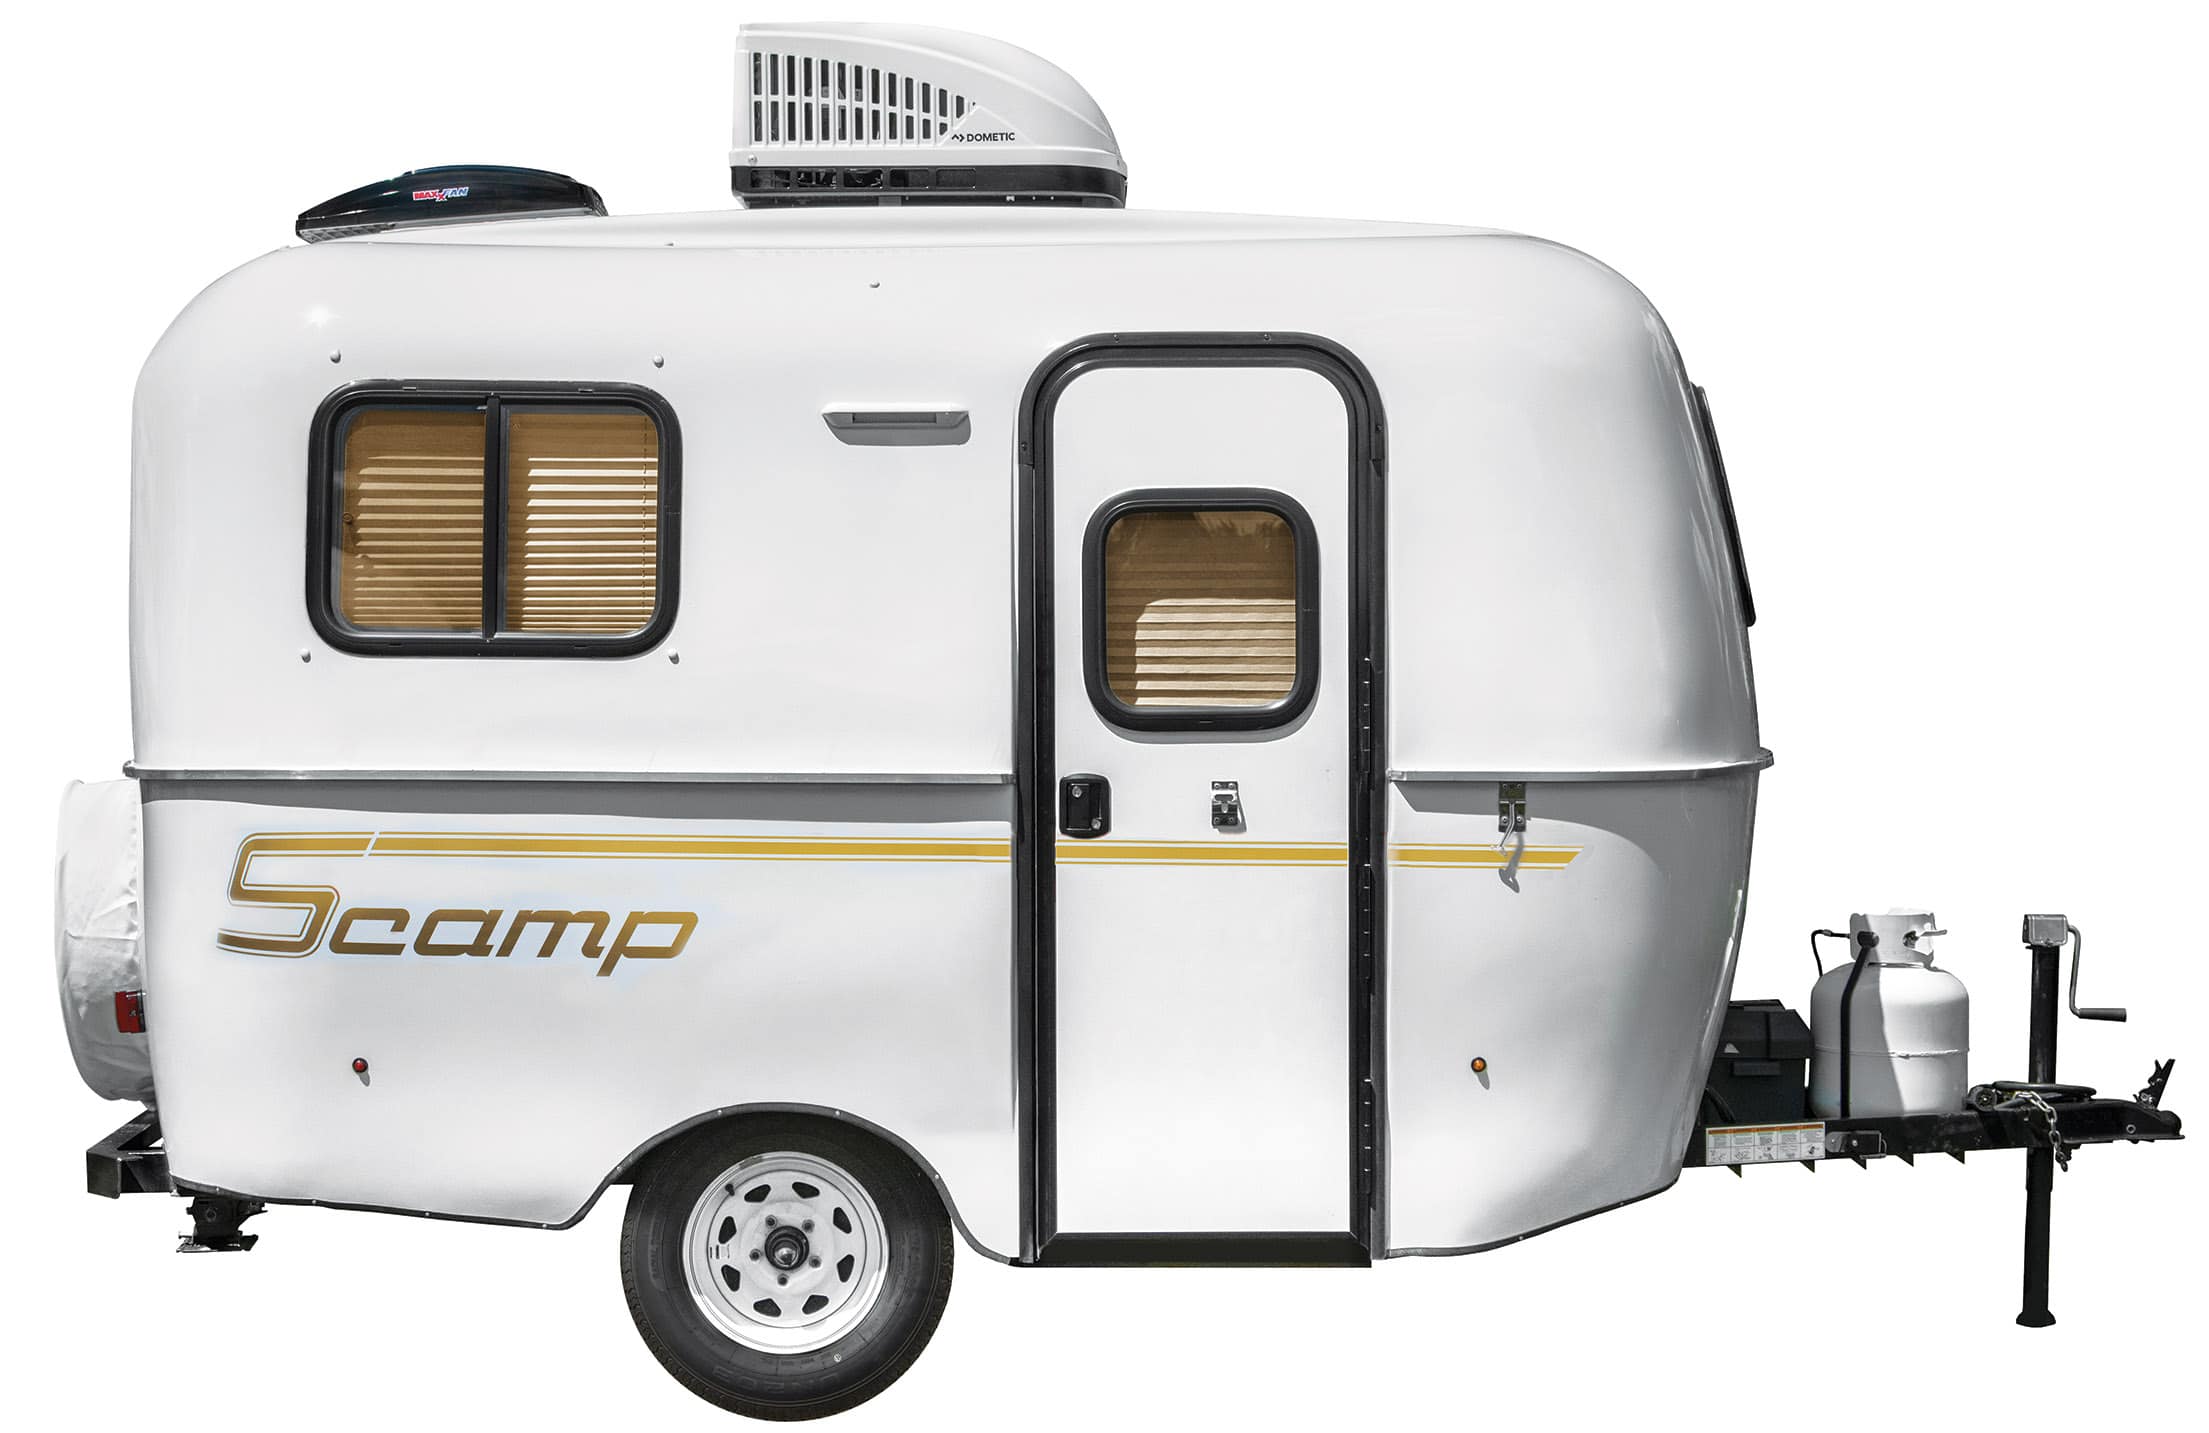 who makes scamp travel trailers